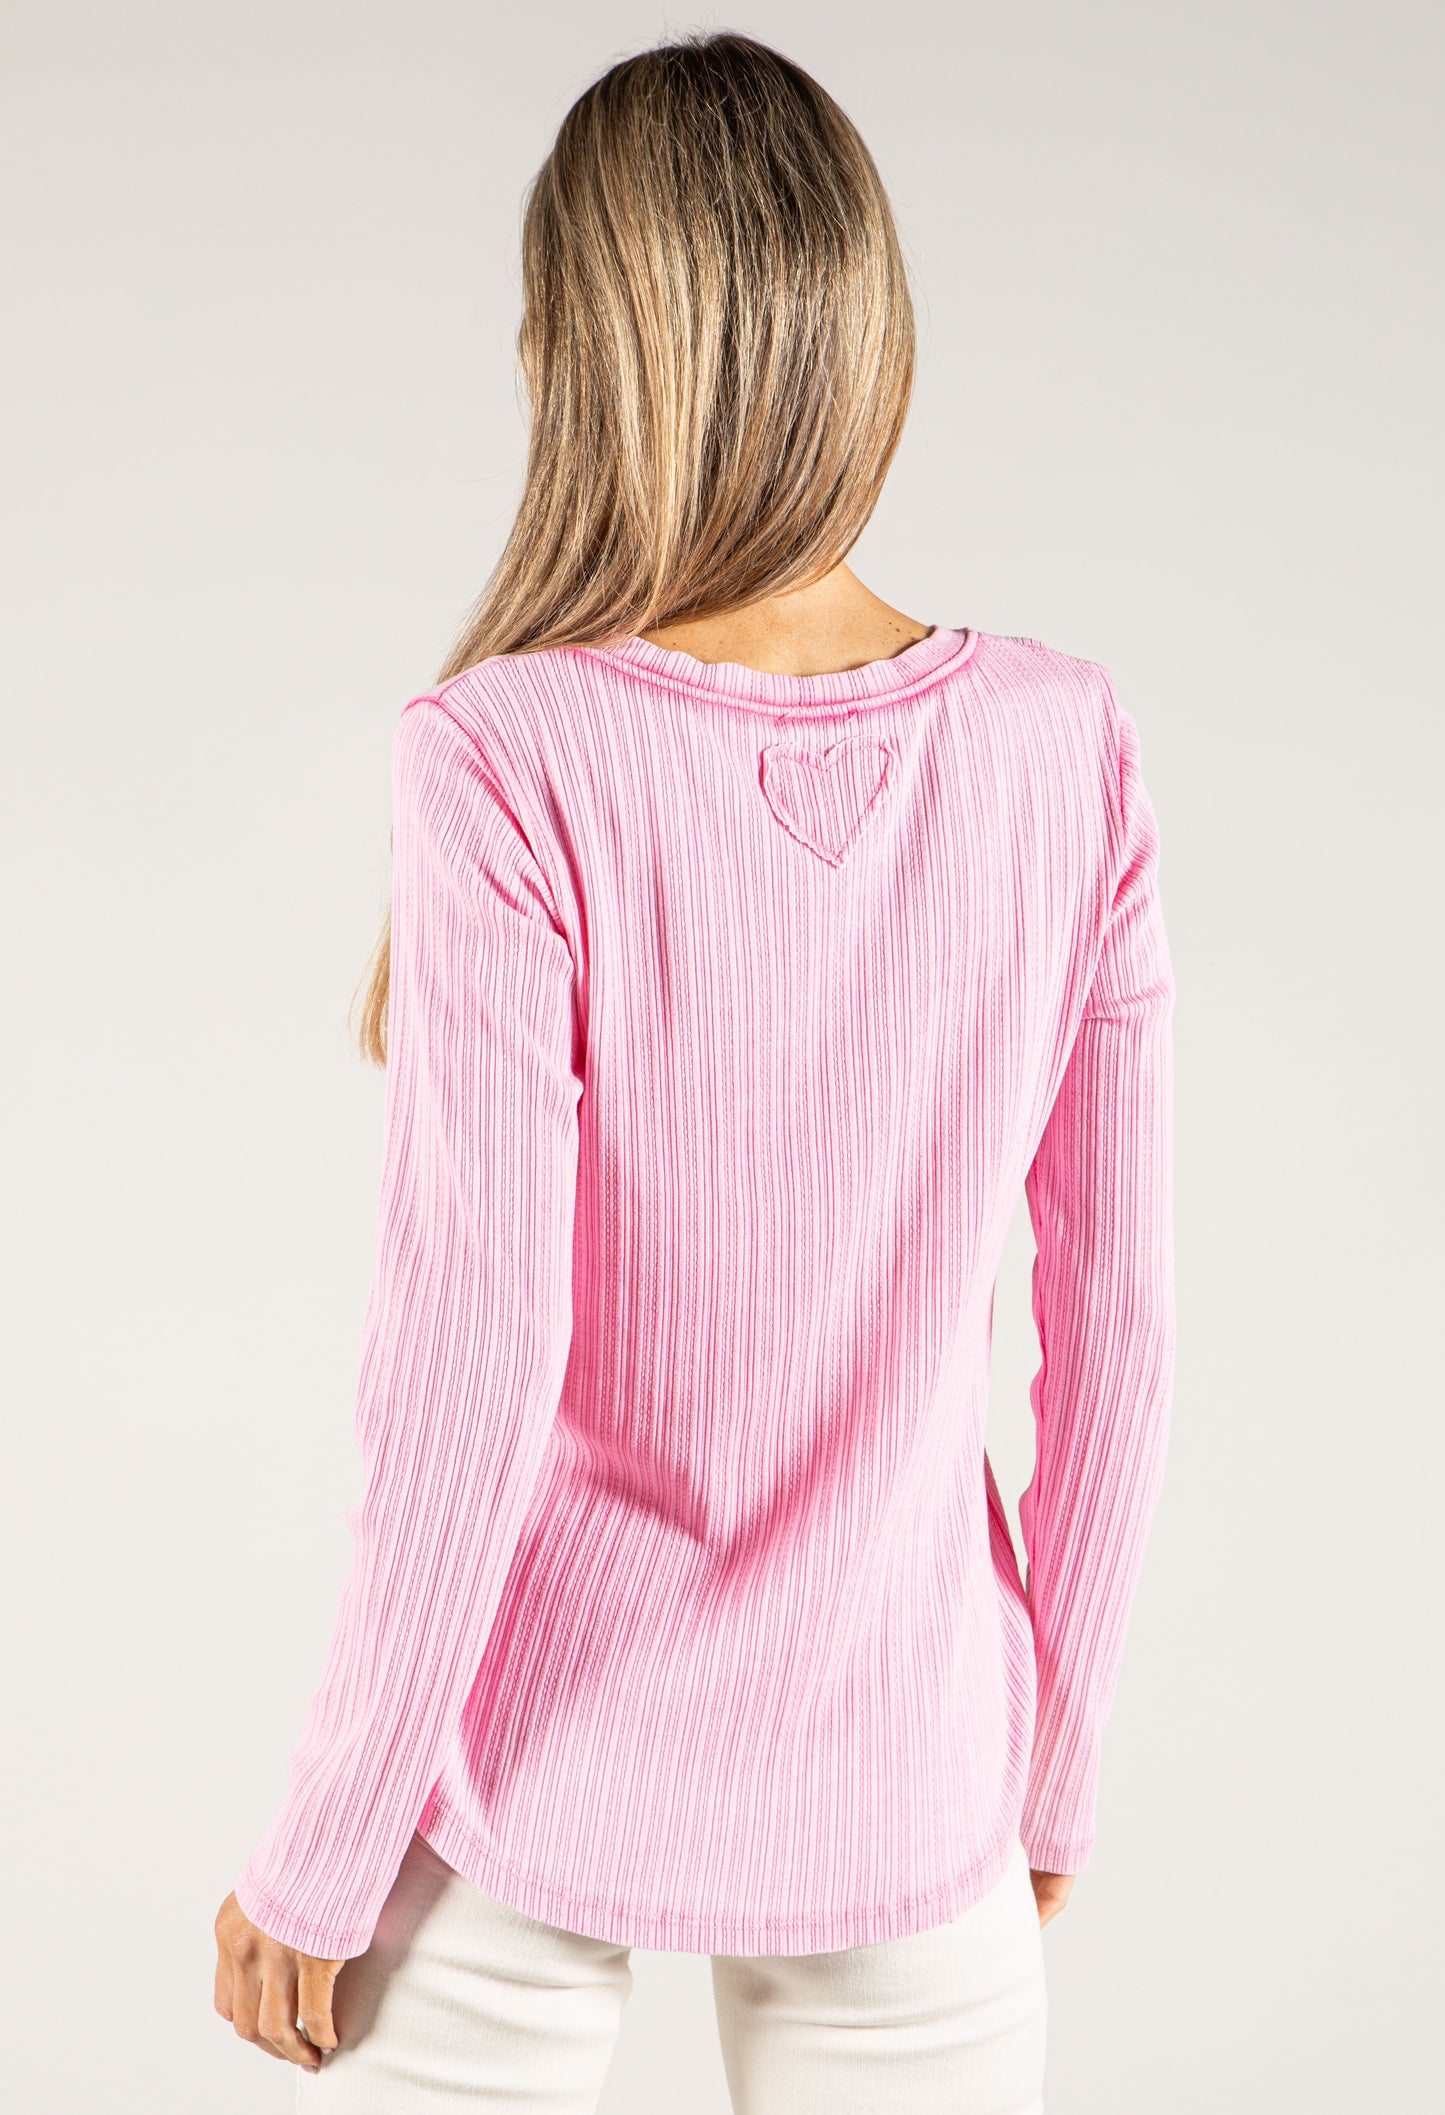 Ribbed Faded Look Top